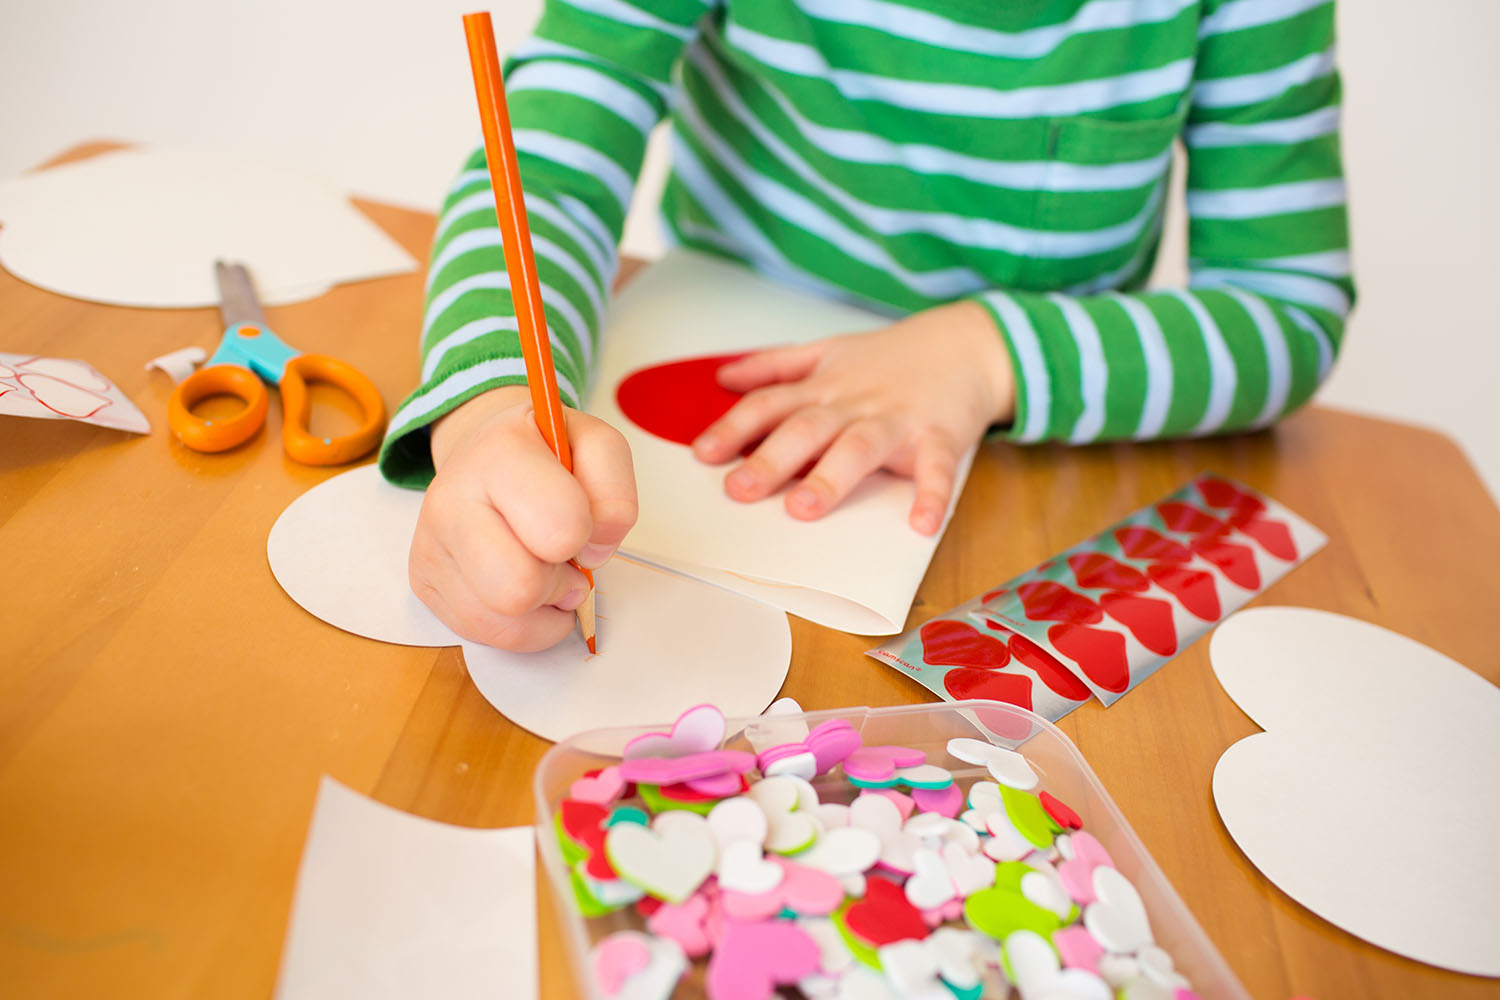 30 Easy Valentines Day Craft Ideas For Kids in 2023